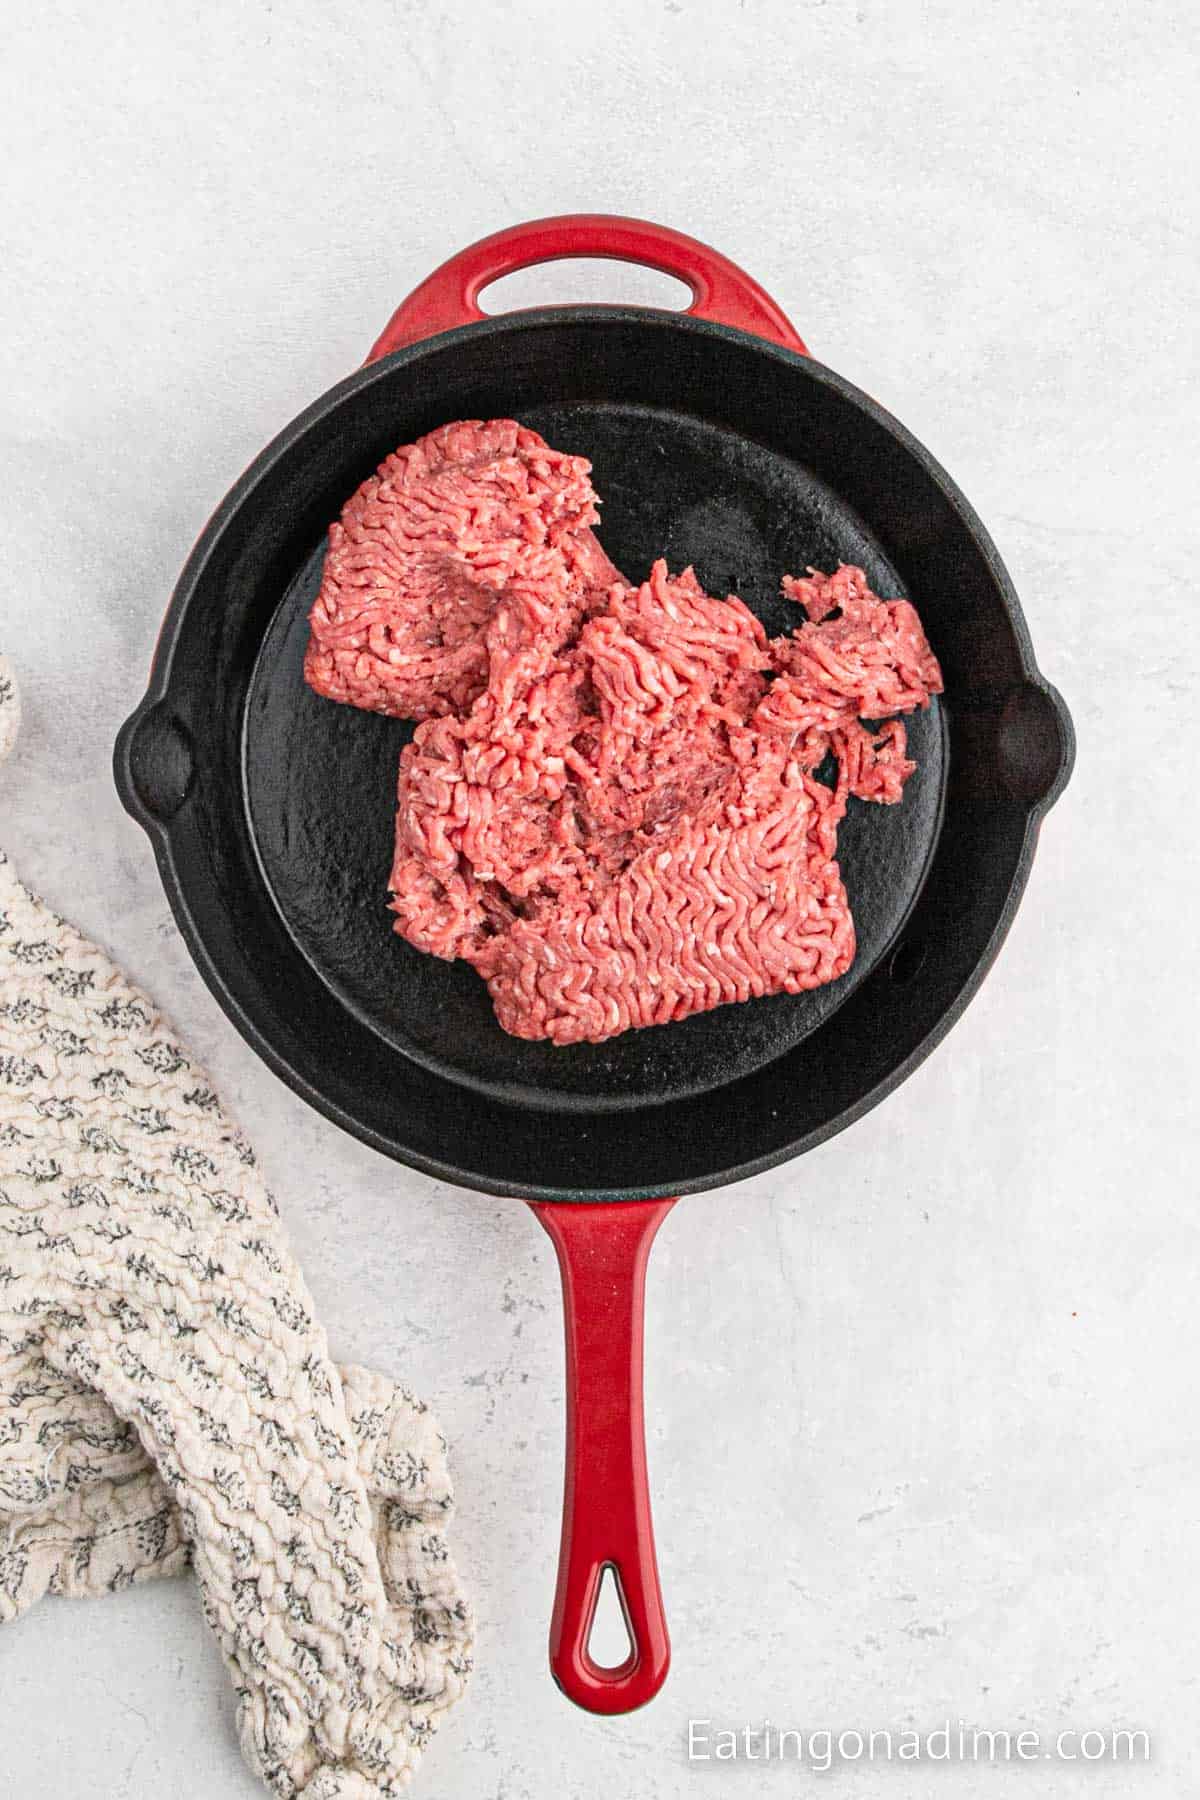 Cooking ground beef in a cast iron skillet